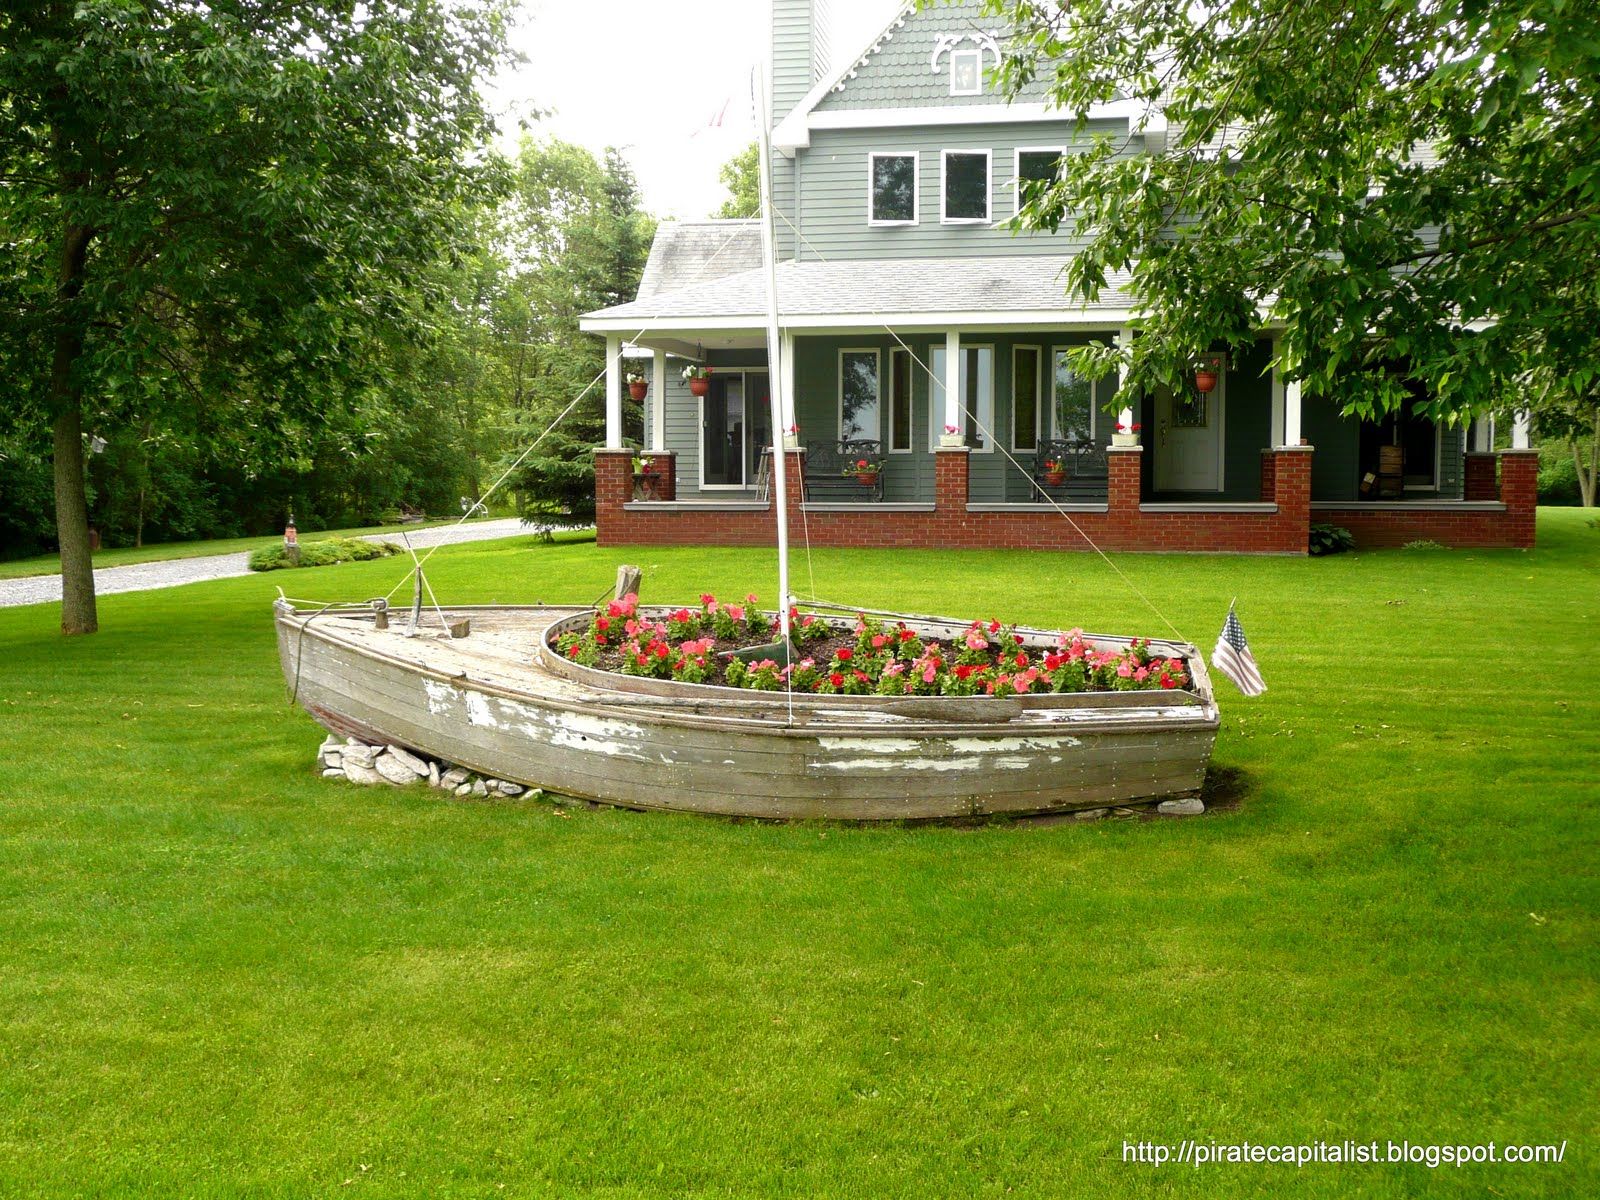  Boat Planter Plans PDF Download – DIY Wooden Boat Plans Projects